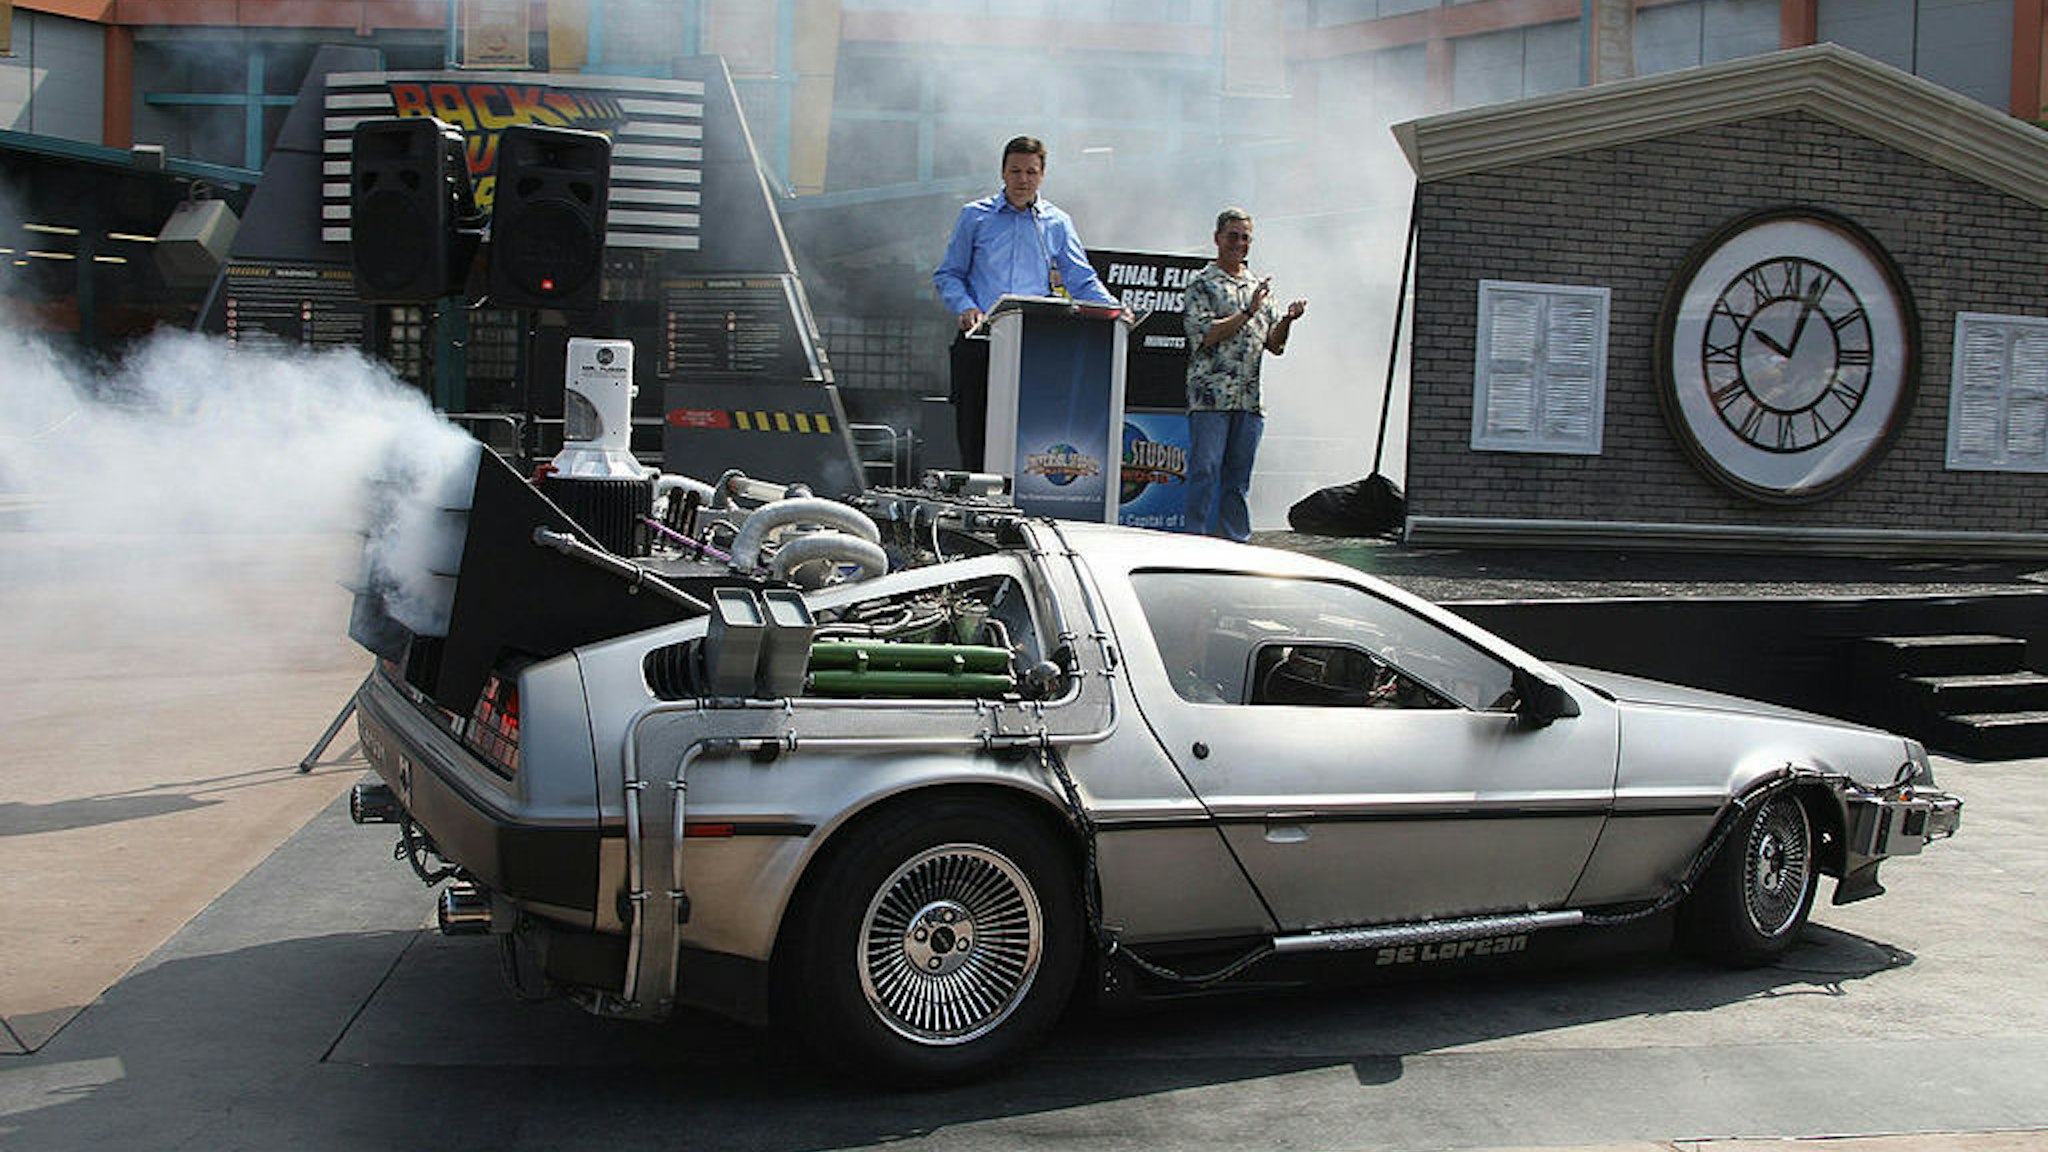 Actor Christopher Lloyd (in passenger seat) arrives in a DeLorean car at Universal Studios Hollywood's "Back to the Future - The Ride" in University City, California, 02 August 2007. Lloyd, who portrayed Doc Brown in the 1985 film "Back to the Future," made the apearence to mark a month-long countdown to the closure of the 14-year-old ride. The DeLorean Motor Co. (Texas), a suburban Houston company that rebuilds DeLoreans, recently announced plans to manufacture a limited number of new Deloreans in 2008. The last DeLorean rolled off the assembly line in Northern Ireland in 1982. On the podium are "Back to the Future" writer and co-creator Bob Gale (R) and Universal Studios Hollywood's Chris MacKenzie (L). AFP PHOTO / ROBYN BECK (Photo credit should read ROBYN BECK/AFP via Getty Images)